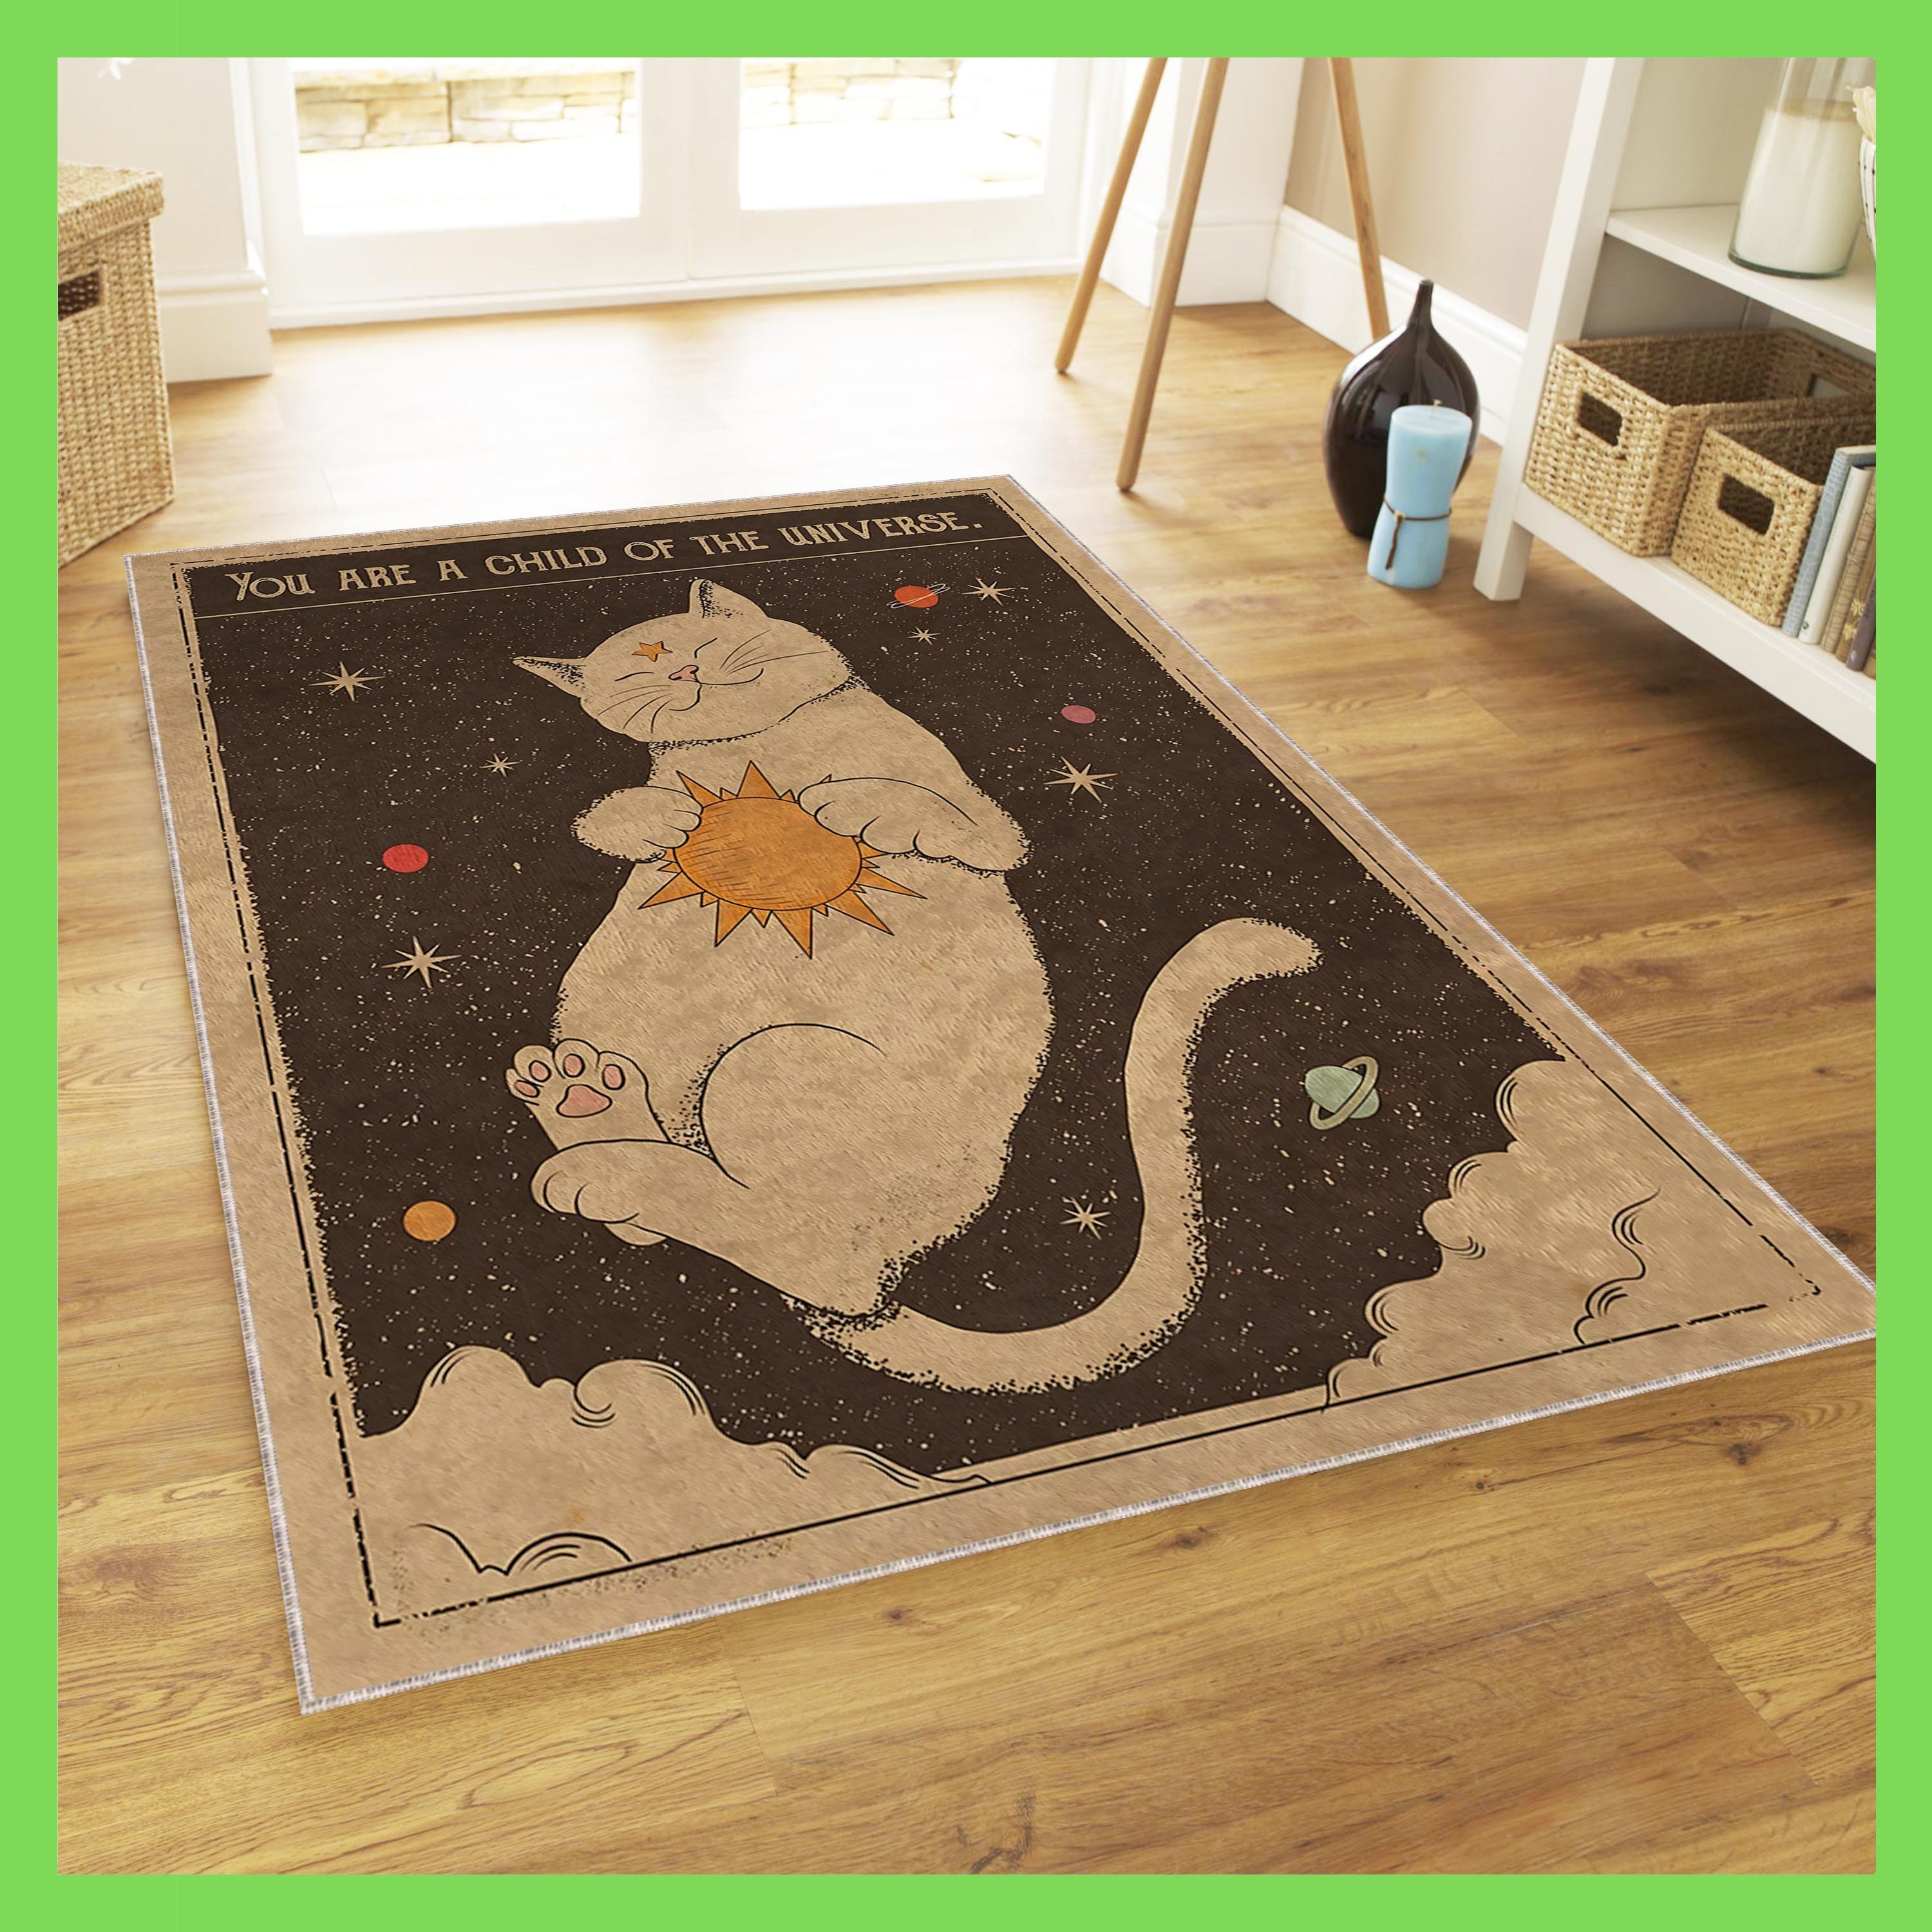 Cat Kitten Area Rug 3x4 - Fantasy Galaxy Carpet, Washable Rugs for Living  Room Bedroom Decor, Soft Non-Slip Low Pile Rug, Decorative Printed Indoor